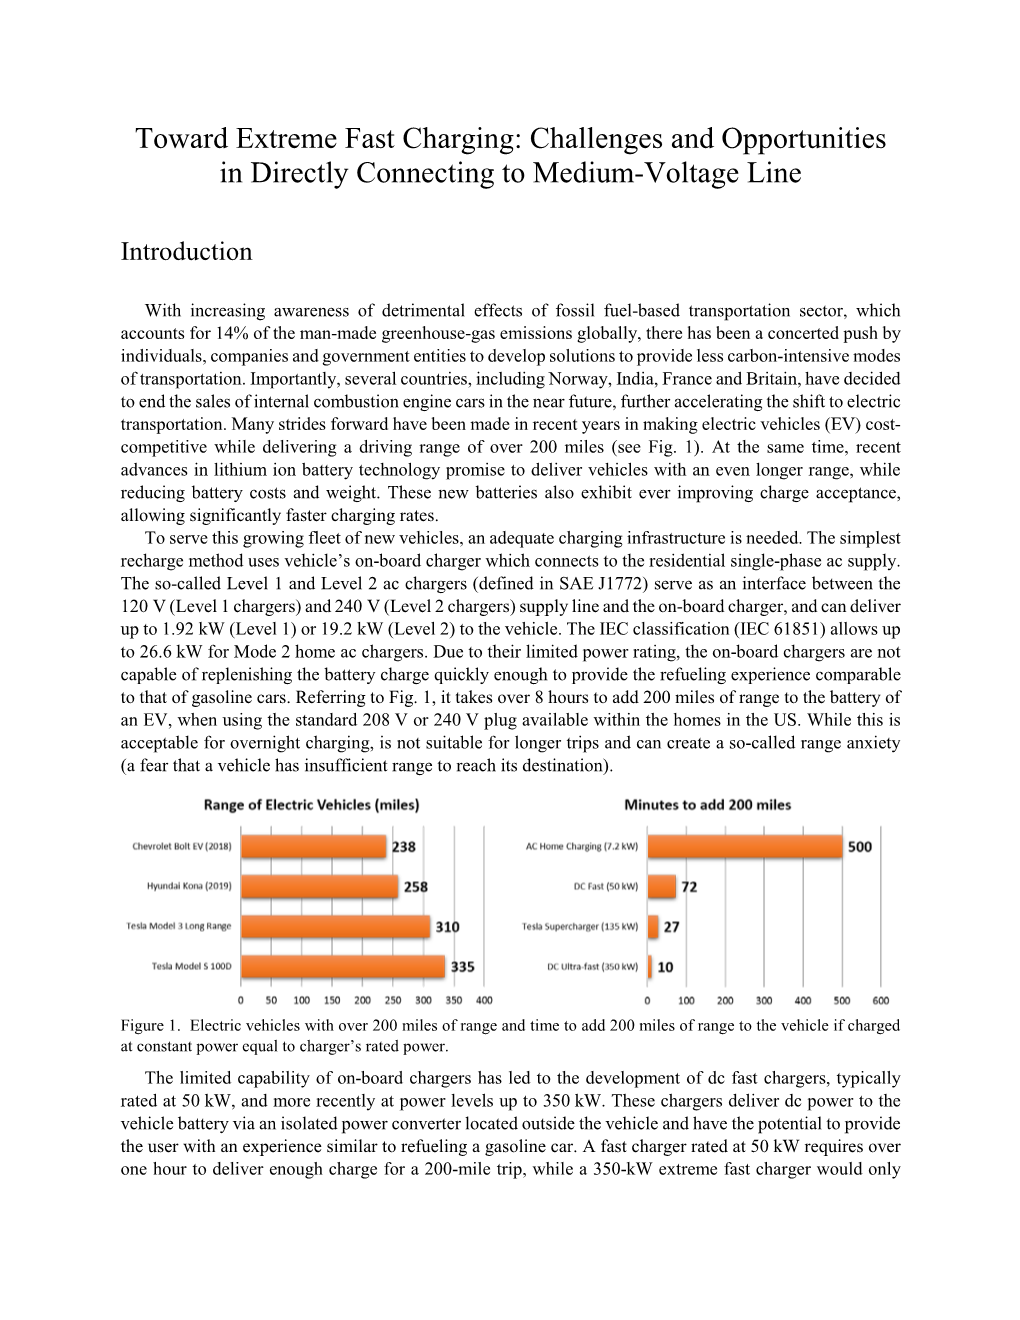 Toward Extreme Fast Charging: Challenges and Opportunities in Directly Connecting to Medium-Voltage Line